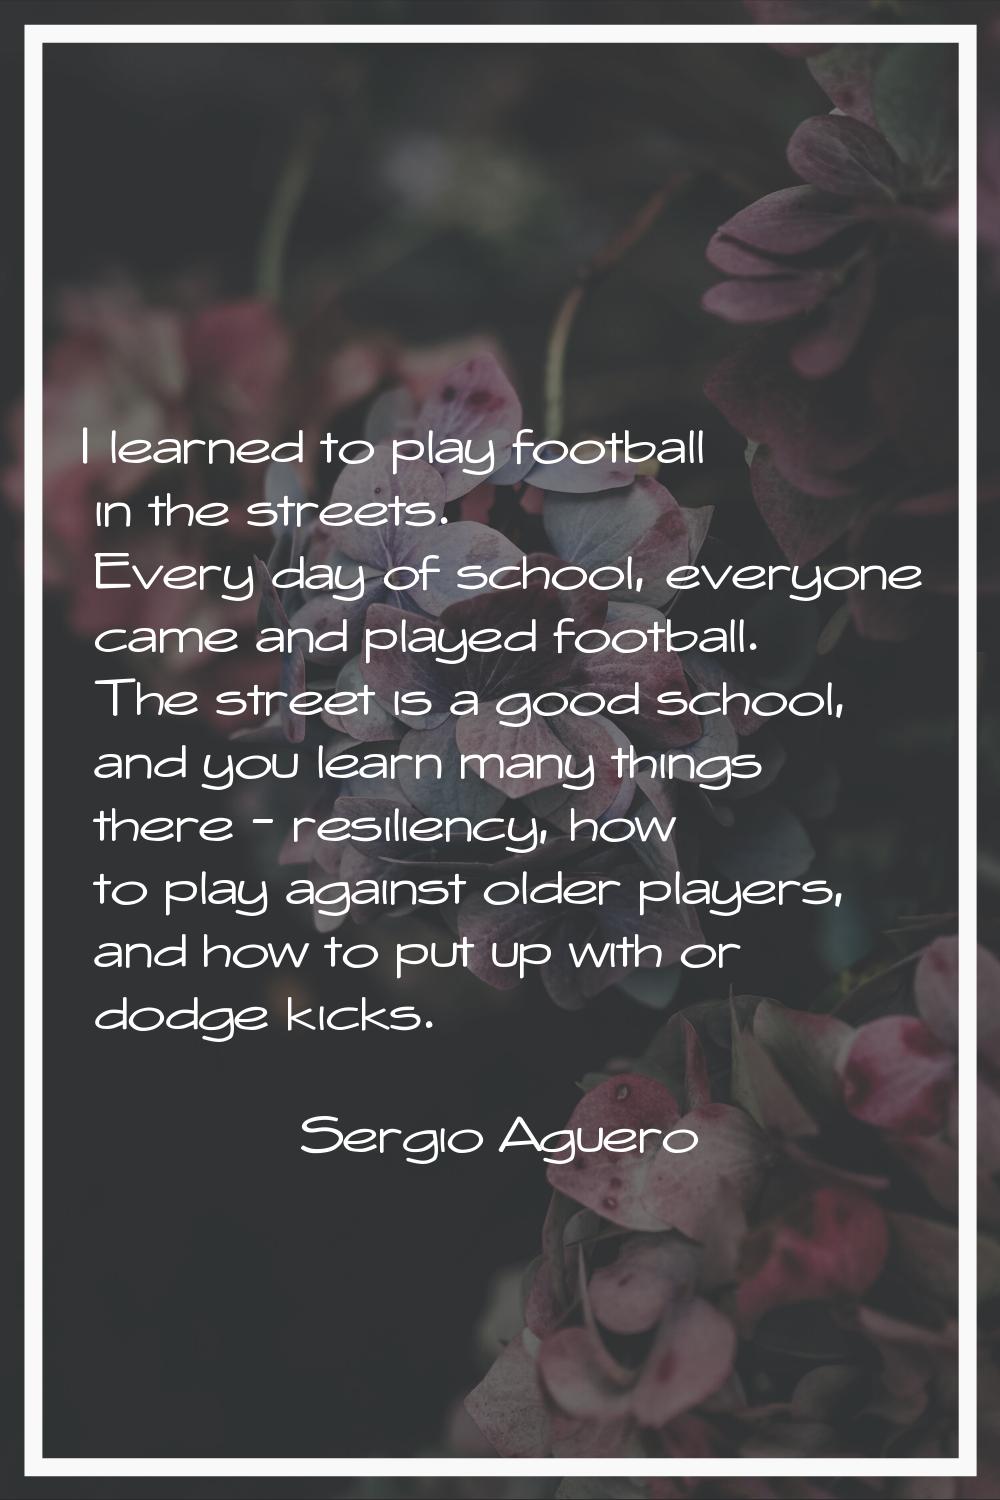 I learned to play football in the streets. Every day of school, everyone came and played football. 